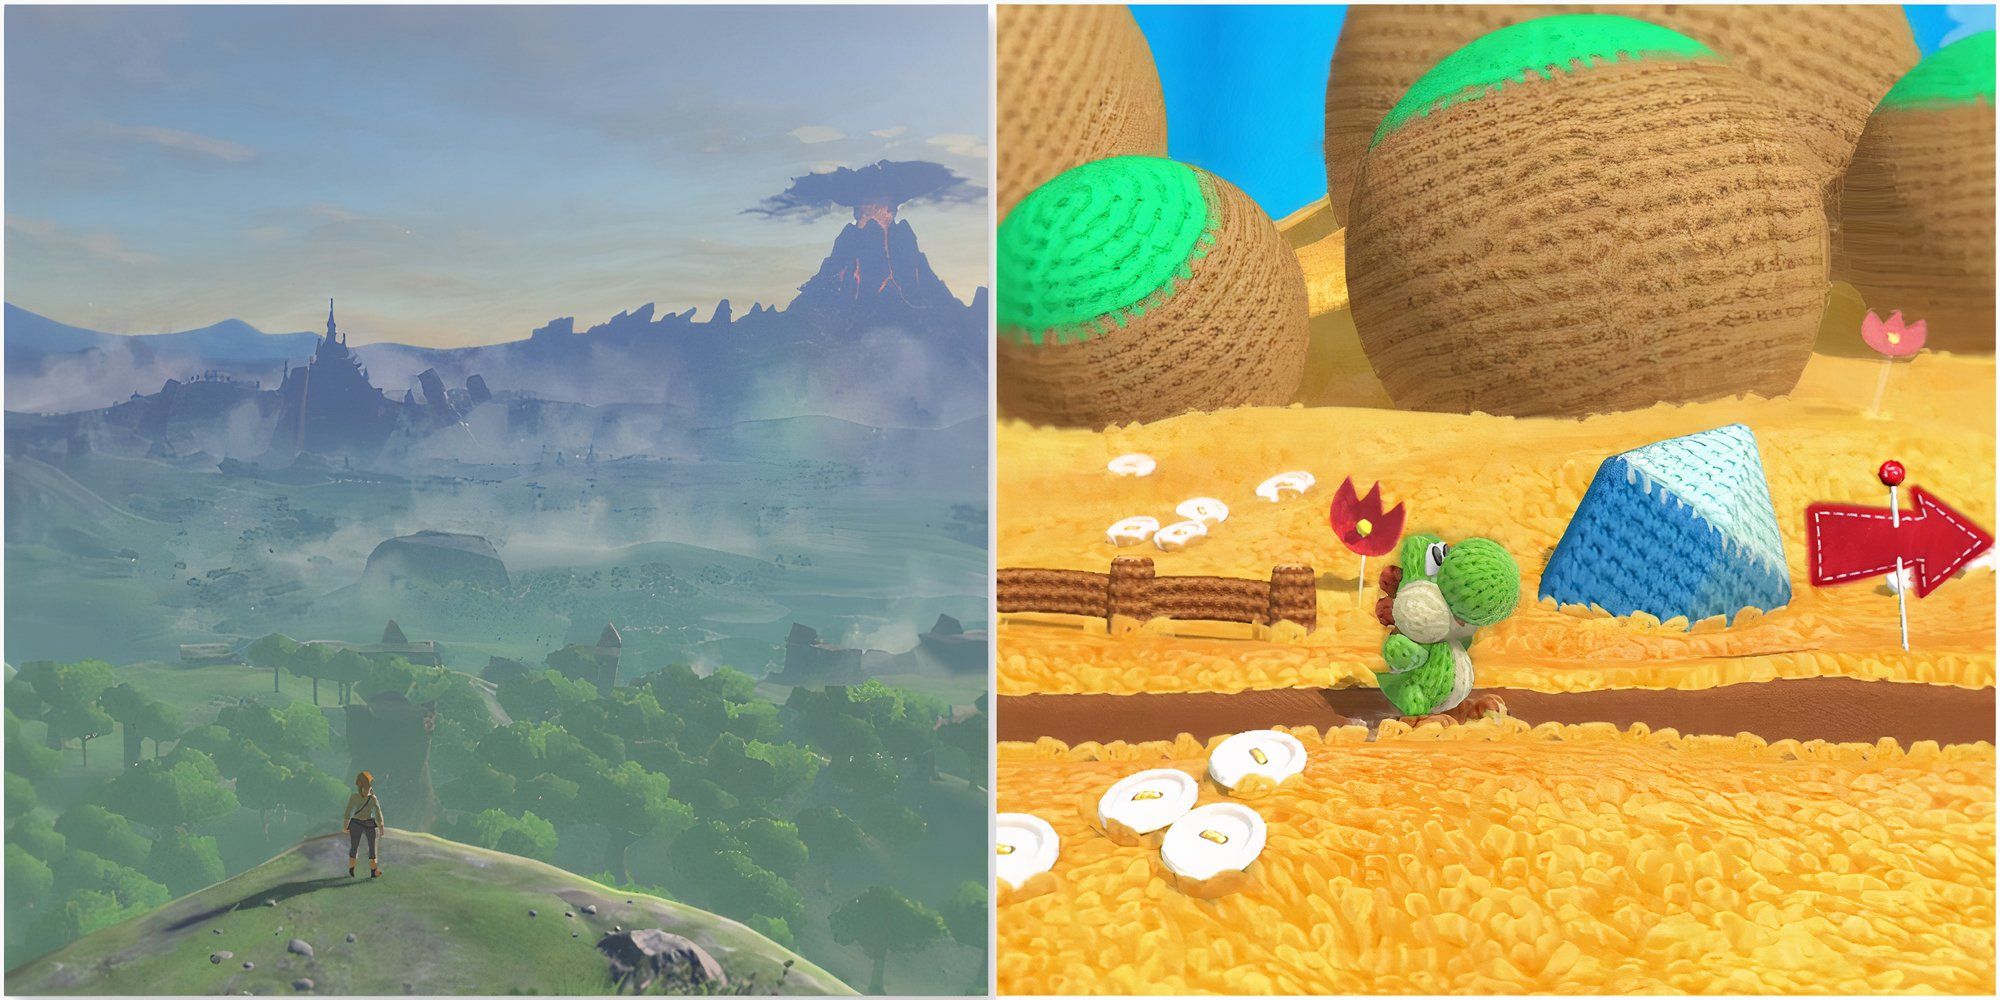 Exploring the world in The Legend Of Zelda Breath Of The Wild and playing a level in Yoshi's Woolly World